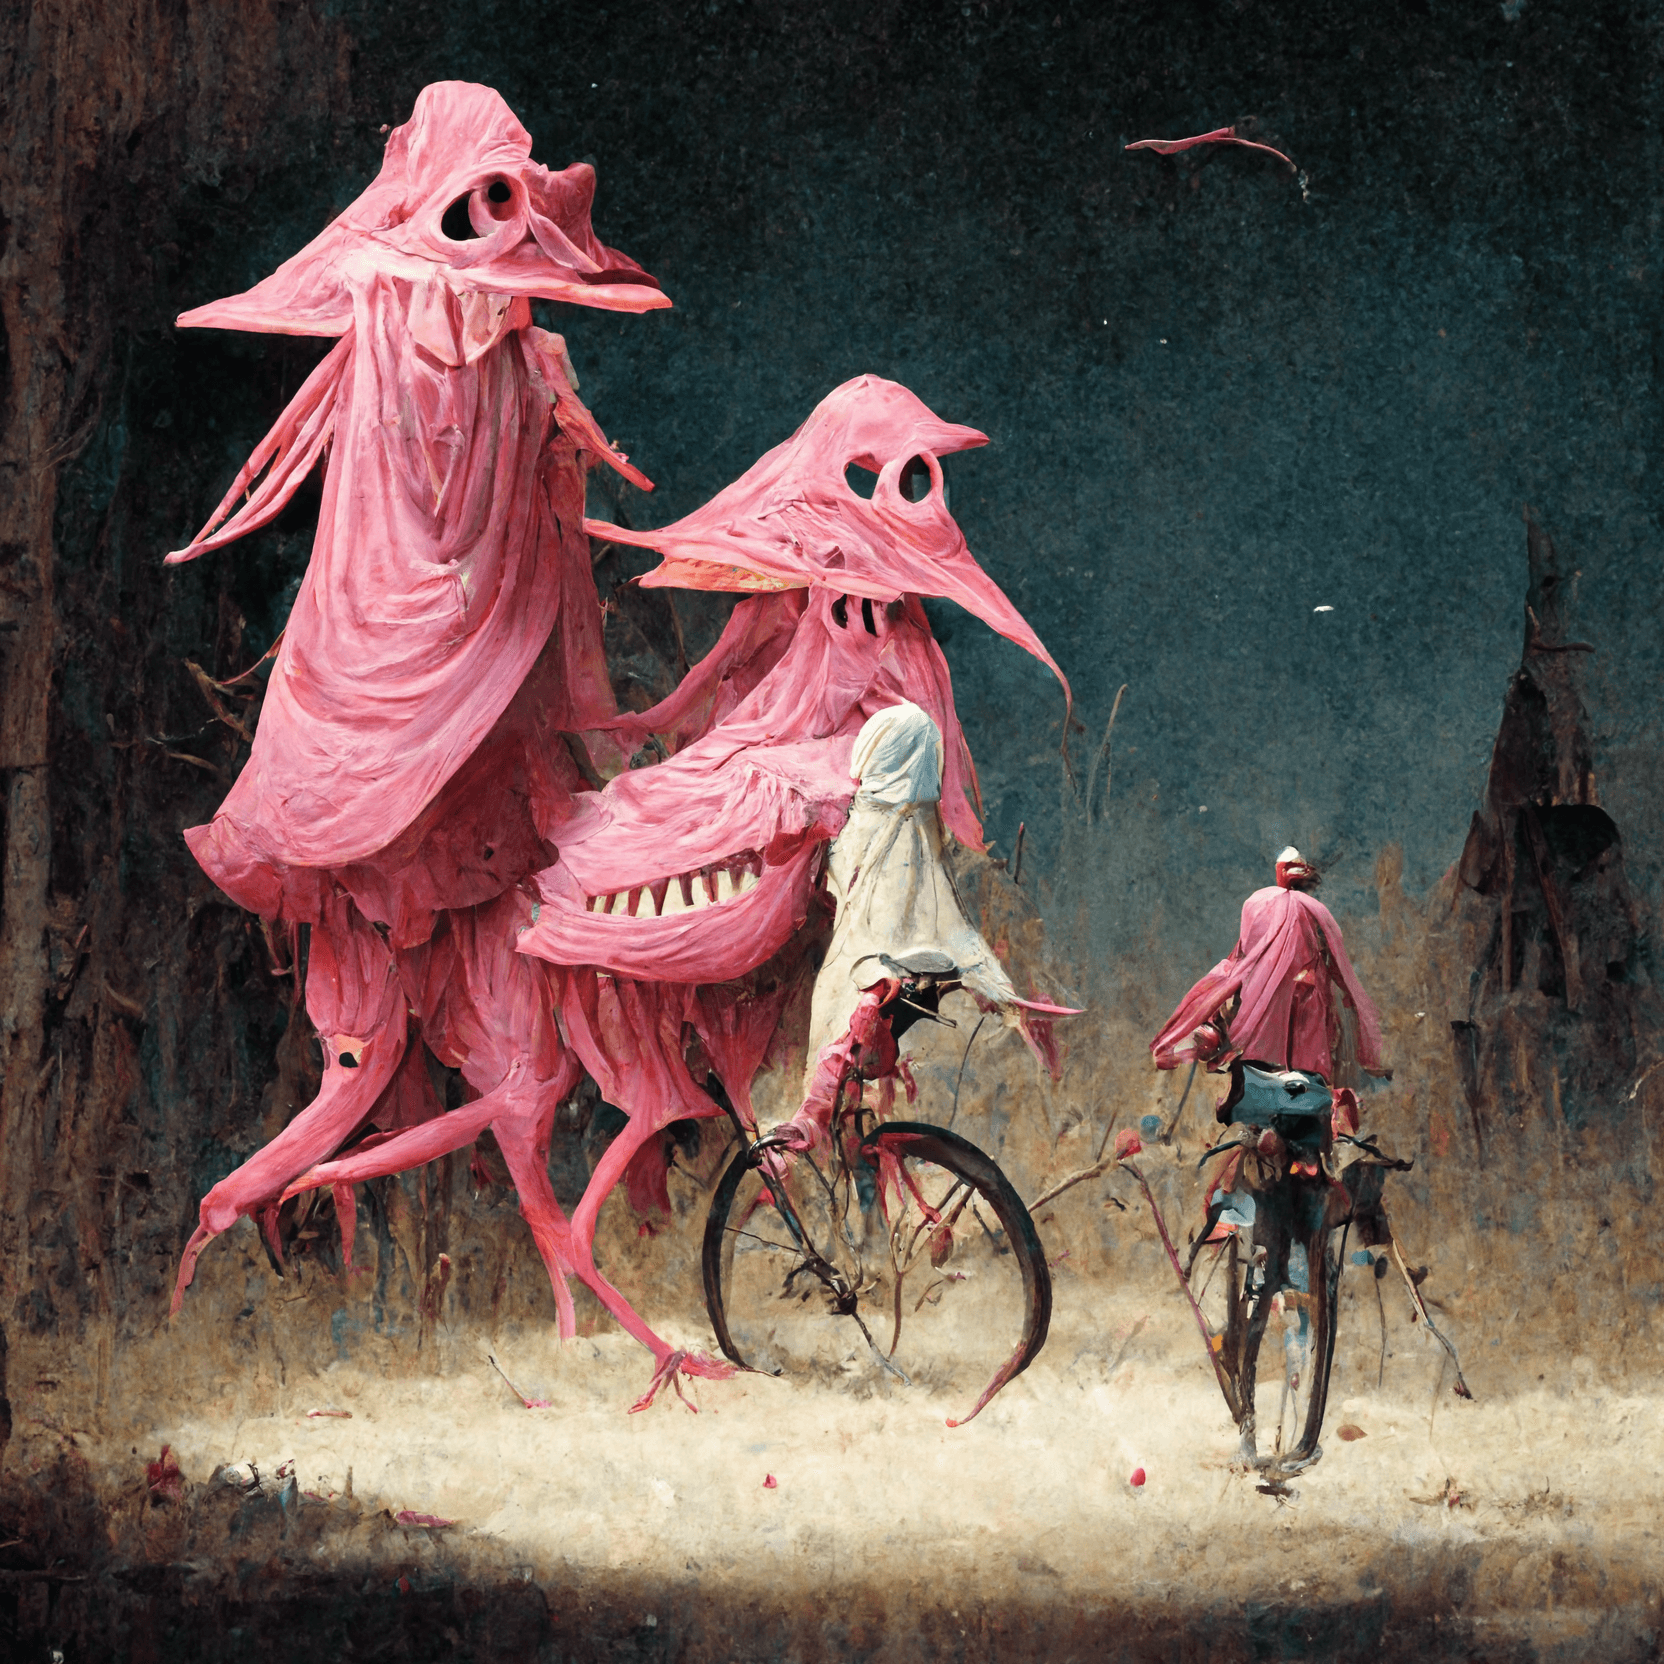 Medieval tall pink things riding a bike